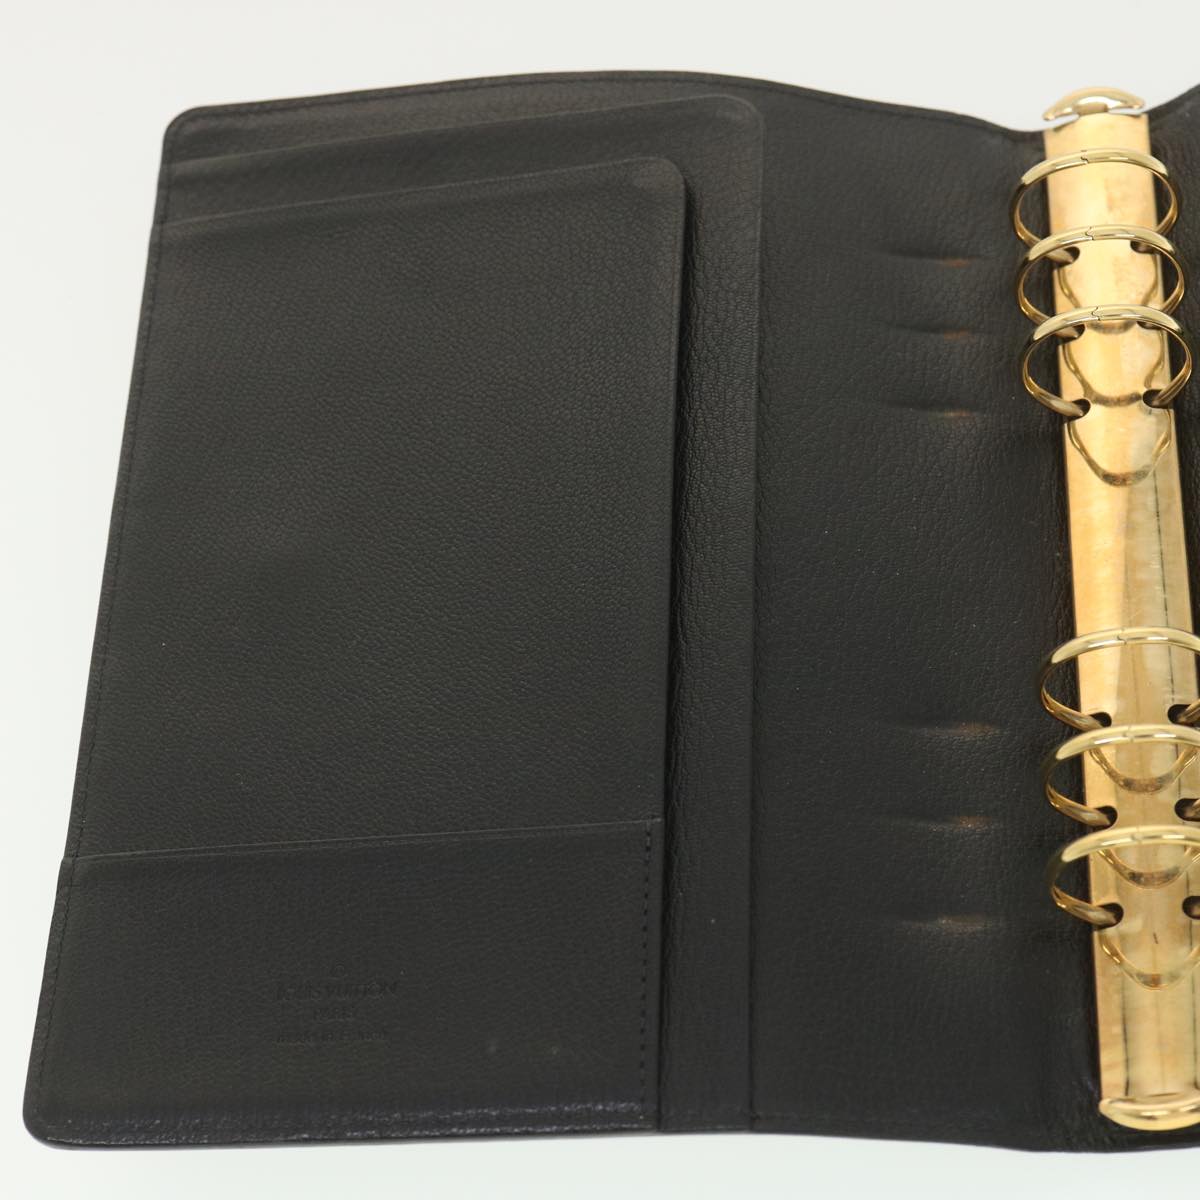 LOUIS VUITTON Nomad Agenda GM Day Planner Cover Black R20477 LV Auth 38087